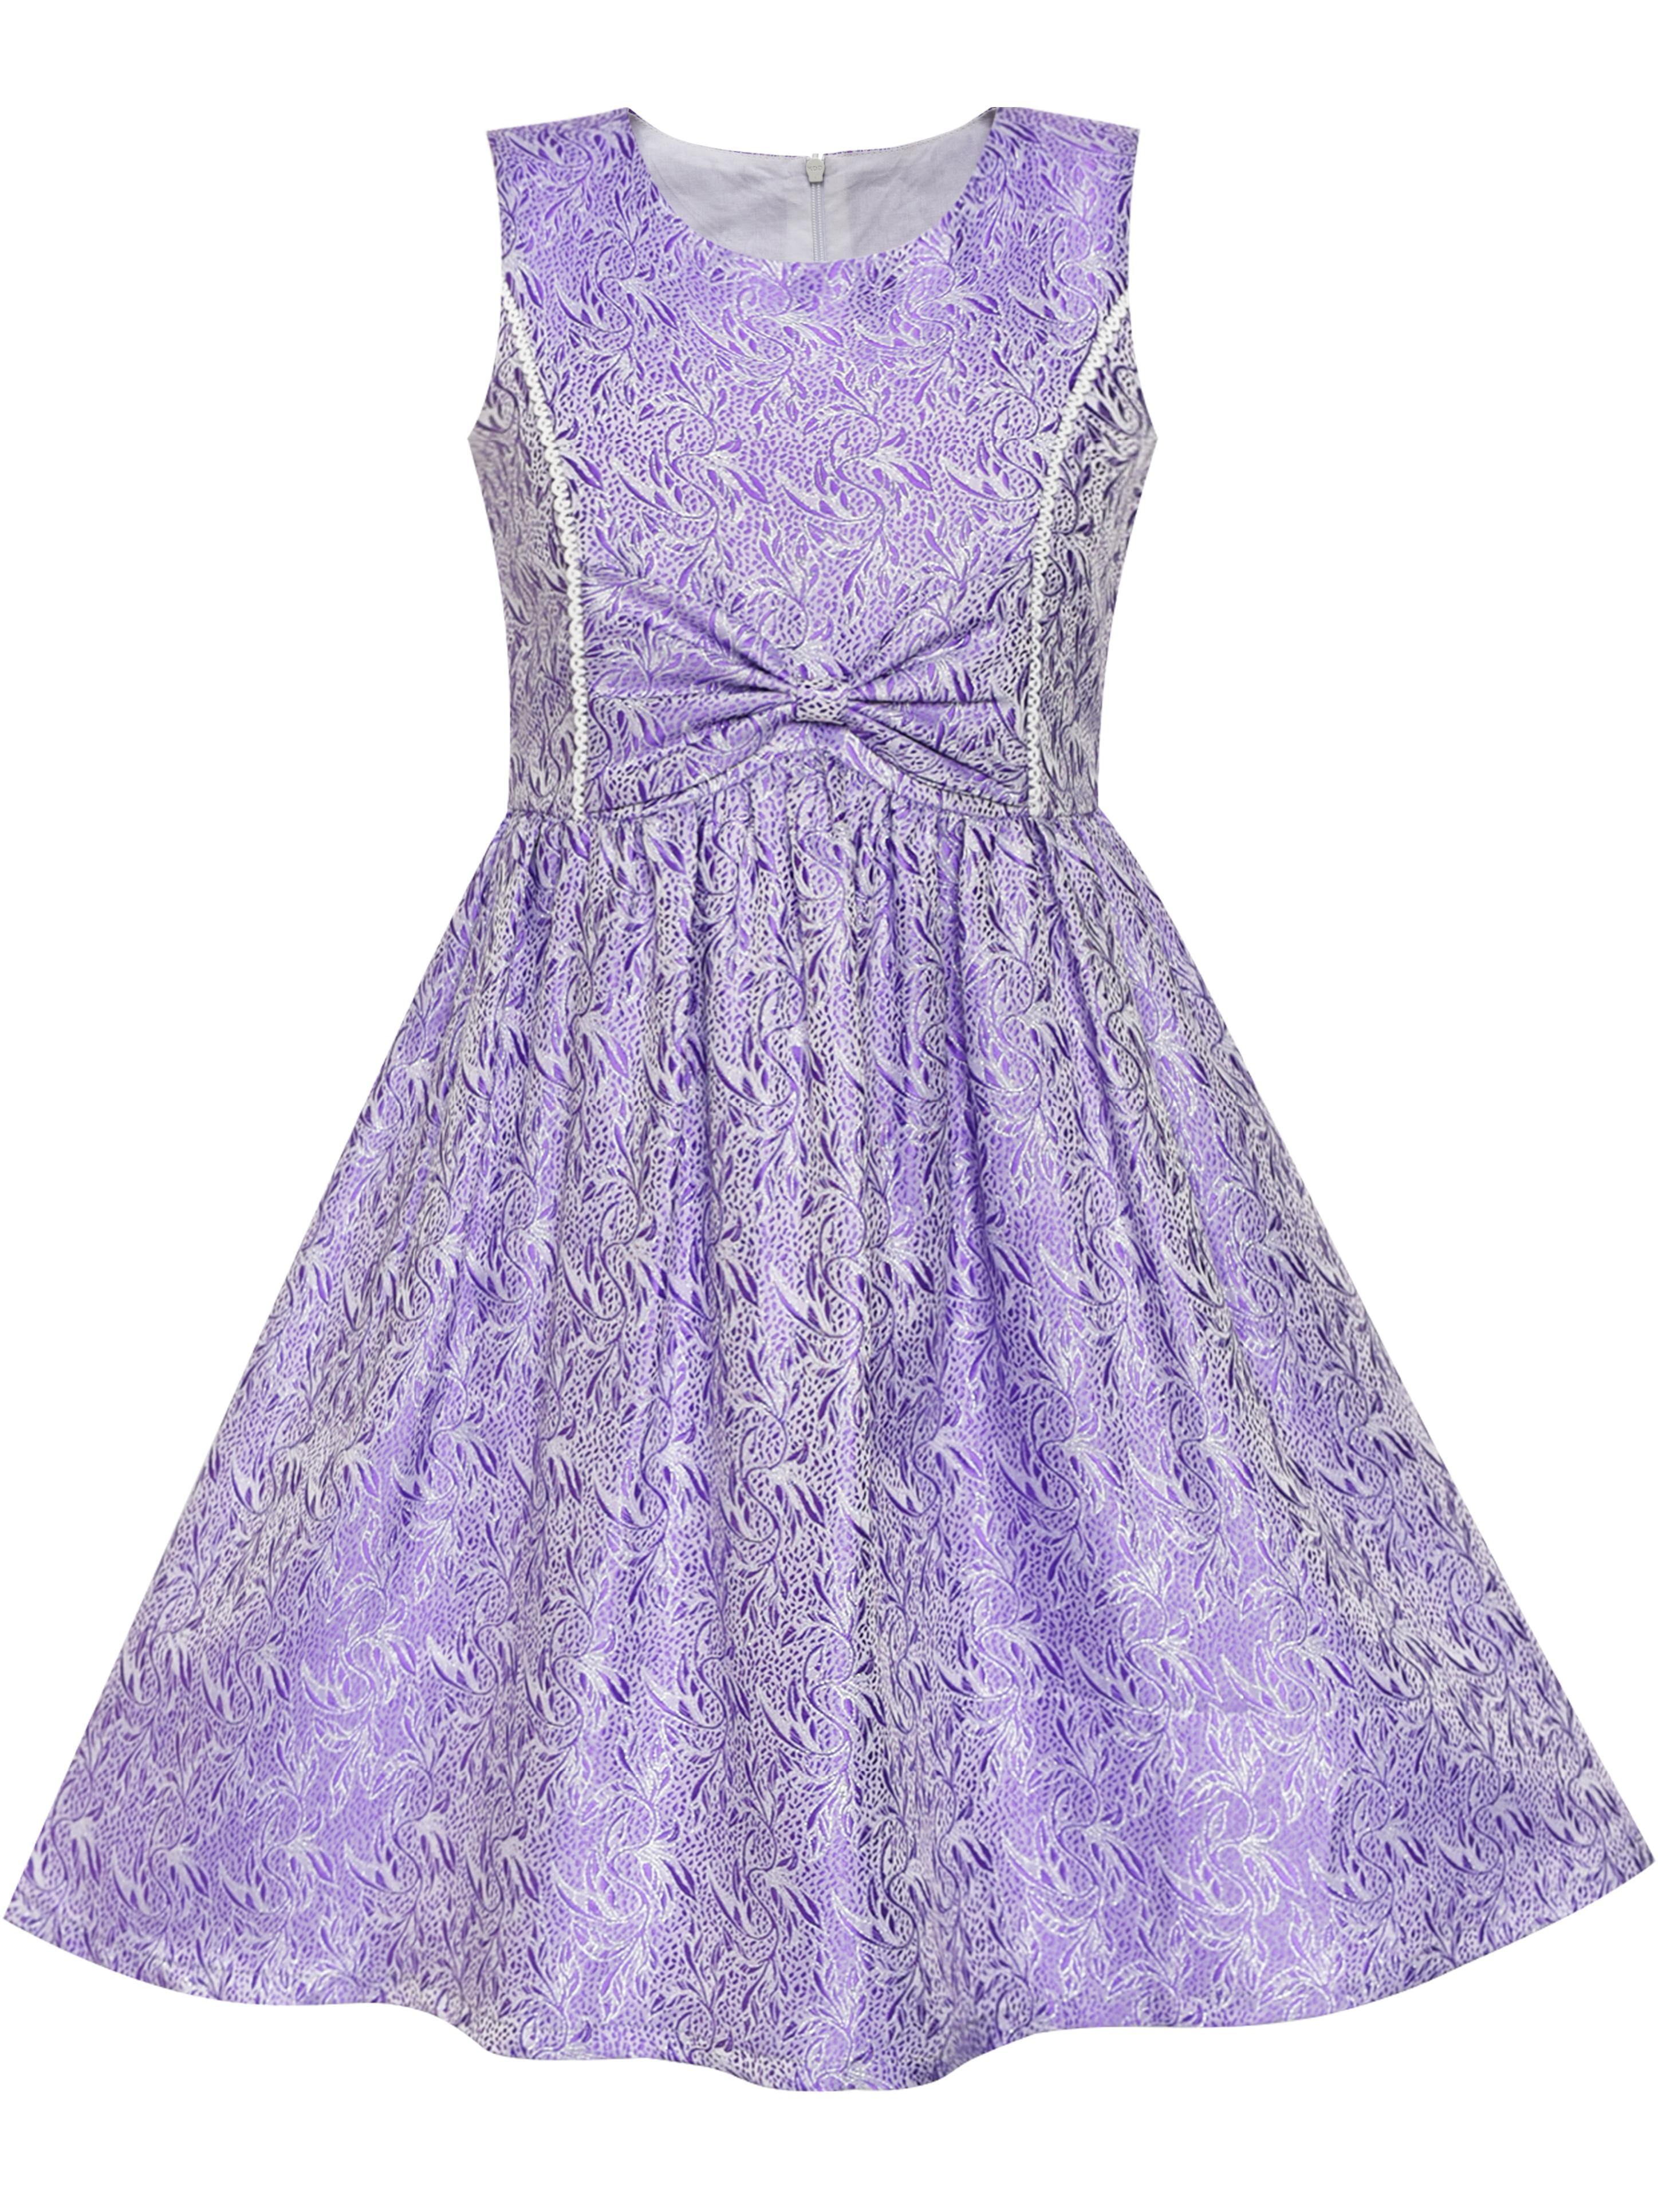 Perfectme Children Clothing Dress Purple Bow Tie Jacquard Fit and Flare Princess 2018 Summer Wedding Party Dresses Size 5-12